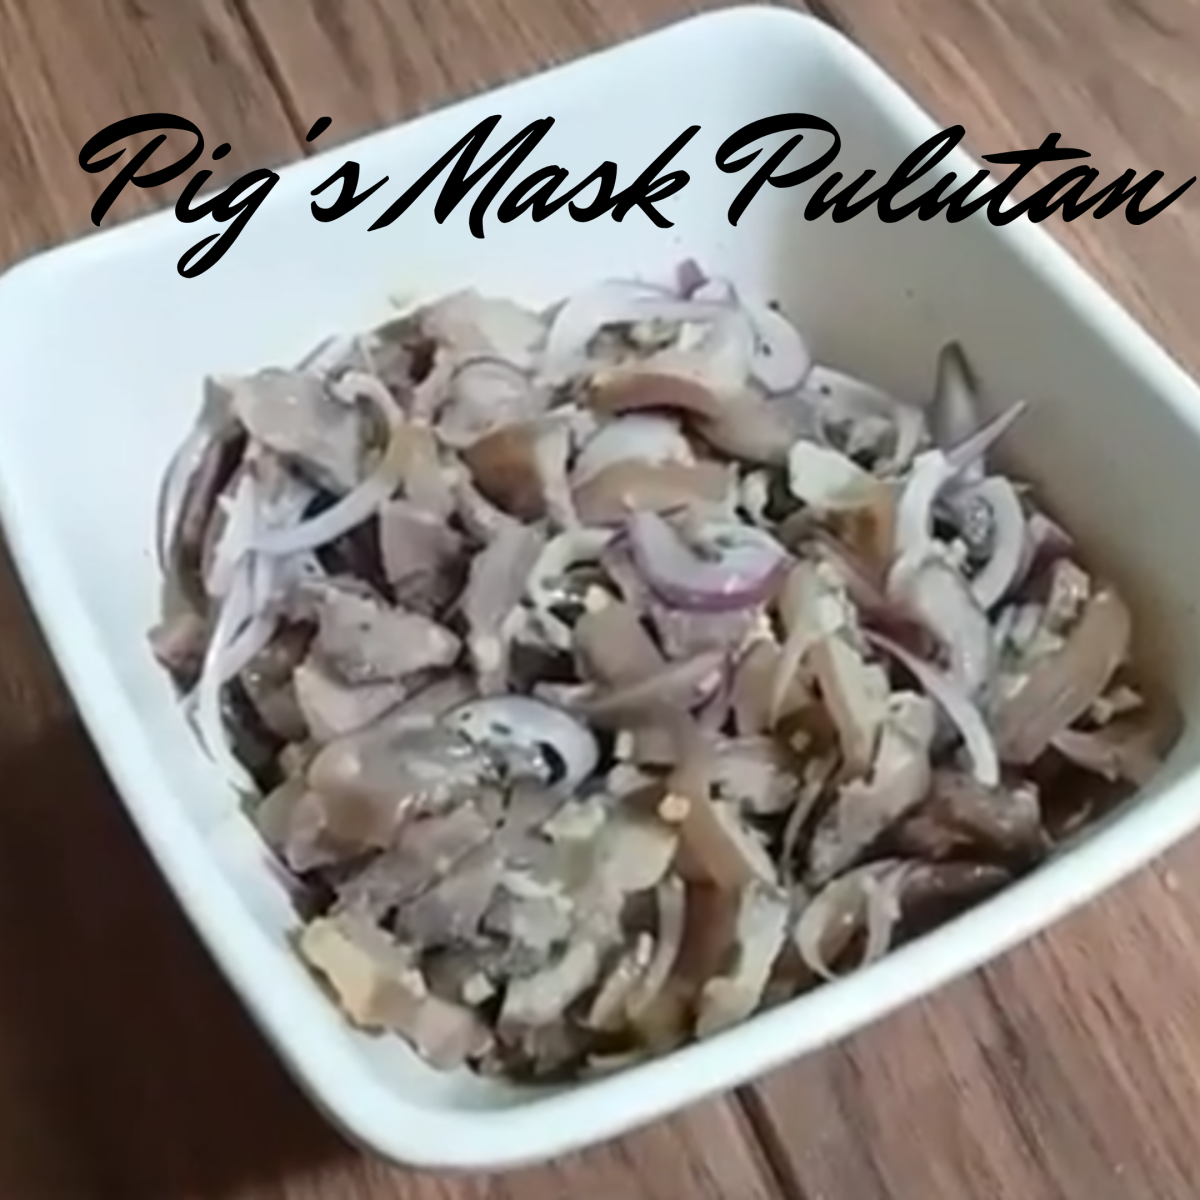 How to Cook Pig's Mask Pulutan: A Filipino-Inspired Dish